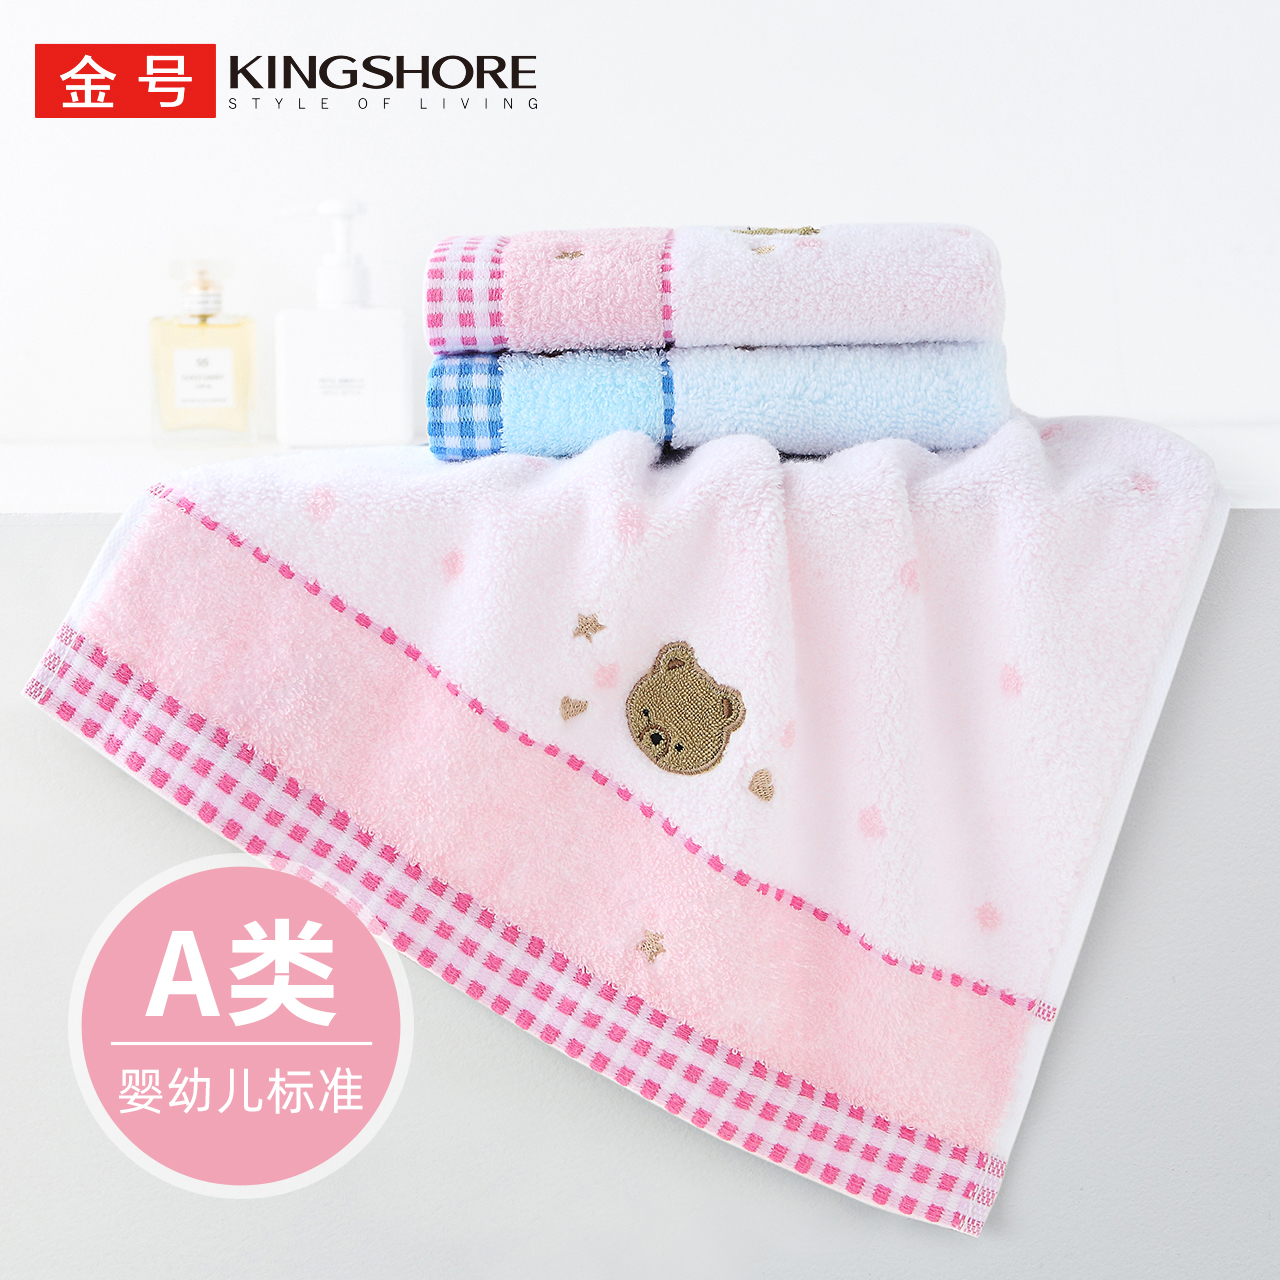 Gold Number of pure cotton Fang towels Cute Little Bear Embroidery Soft Absorbent Child Wash face small towel Home Baby Saliva Towel